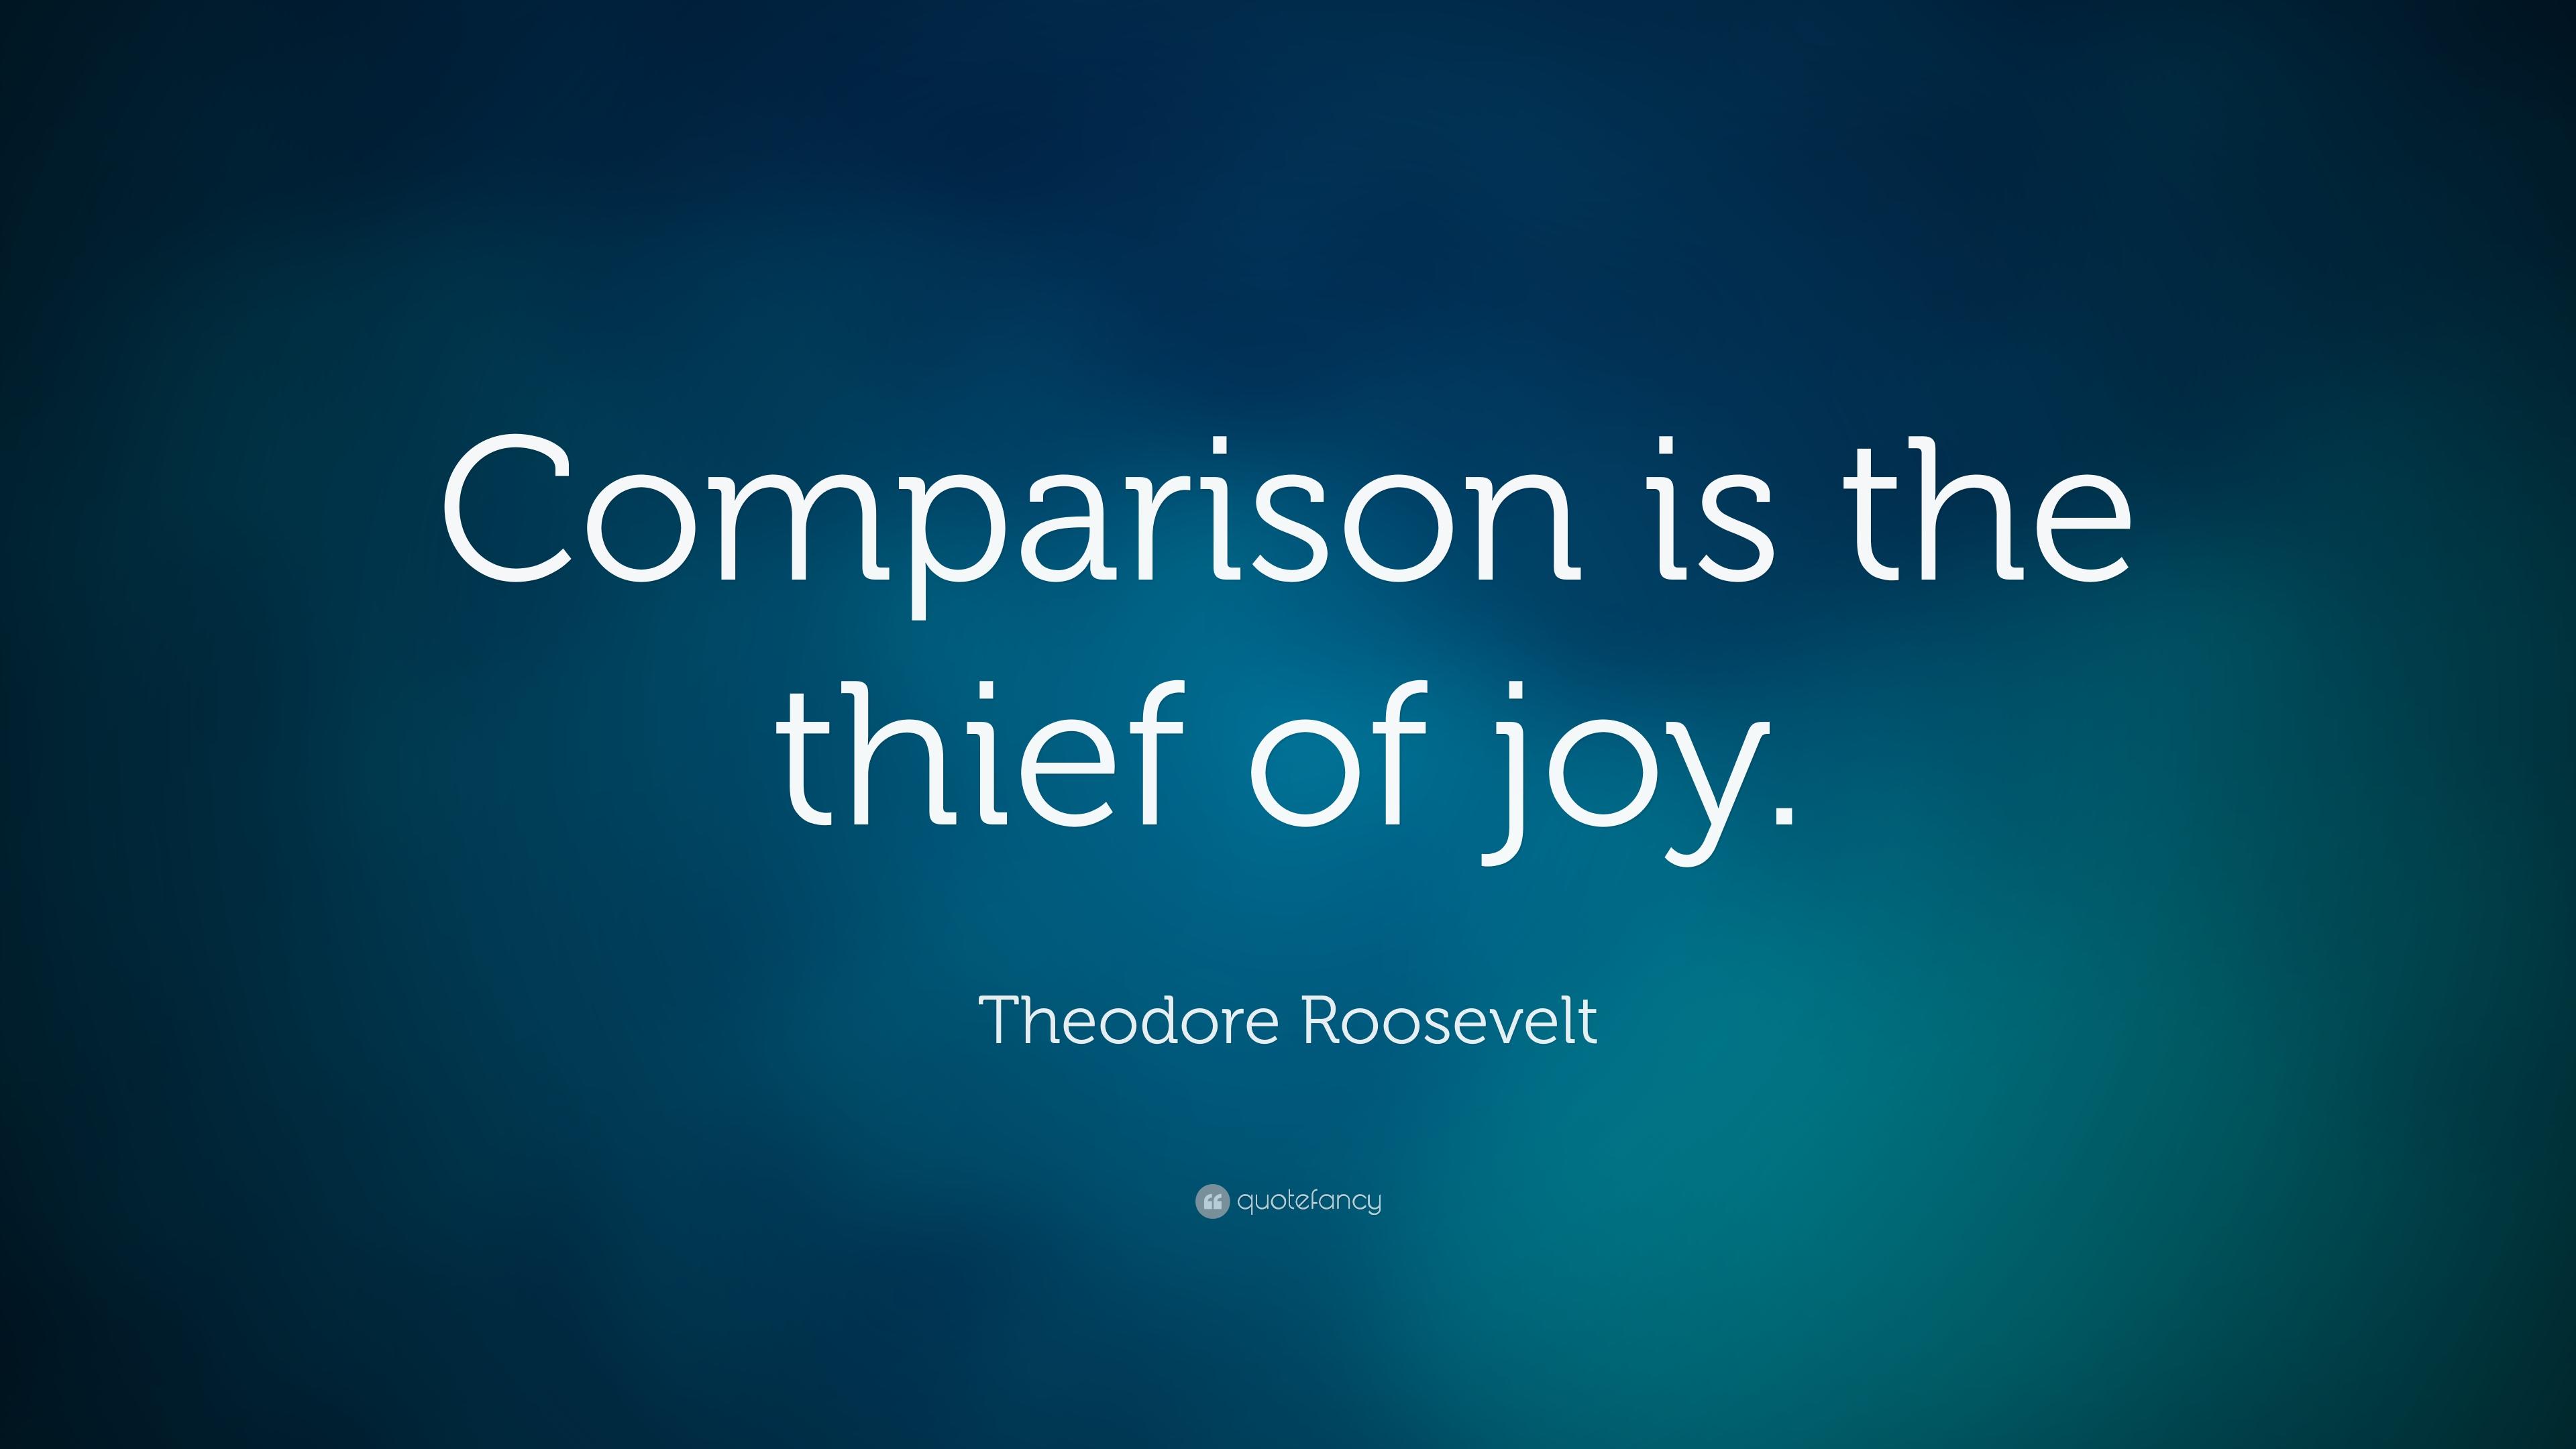 Theodore Roosevelt Quote: “Comparison is the thief of joy.” 17